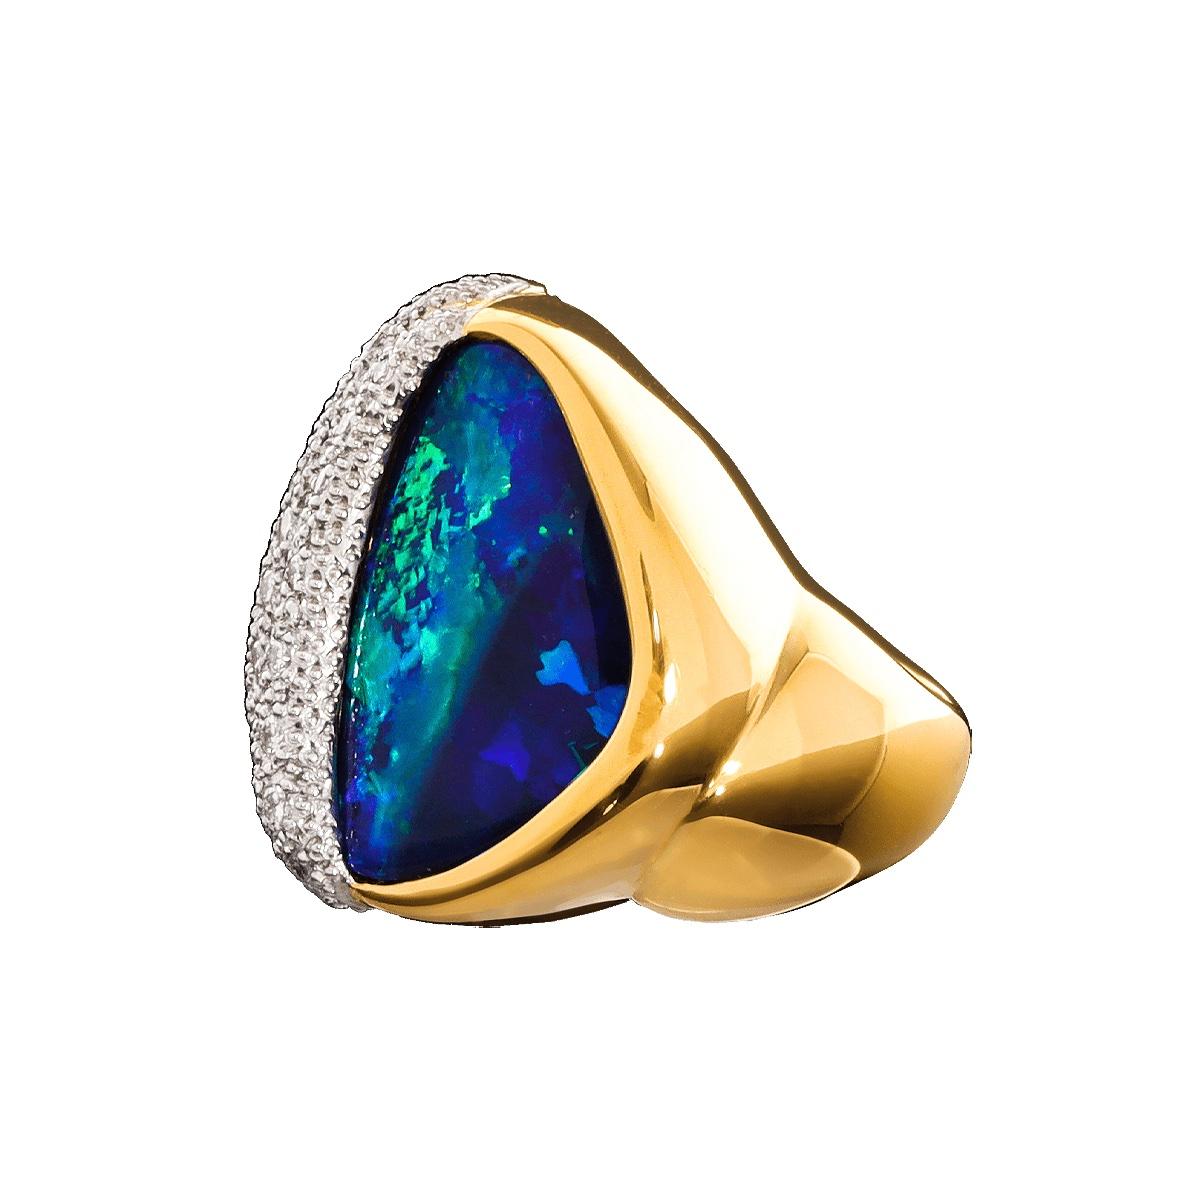 In a class of its own with a style from the roaring ’40s, this beautiful cocktail rings has it all. A stunning multi-patterned Black Boulder Opal, encrusted pavé set brilliant white diamonds, 18K solid gold and platinum 950. Every woman should own a